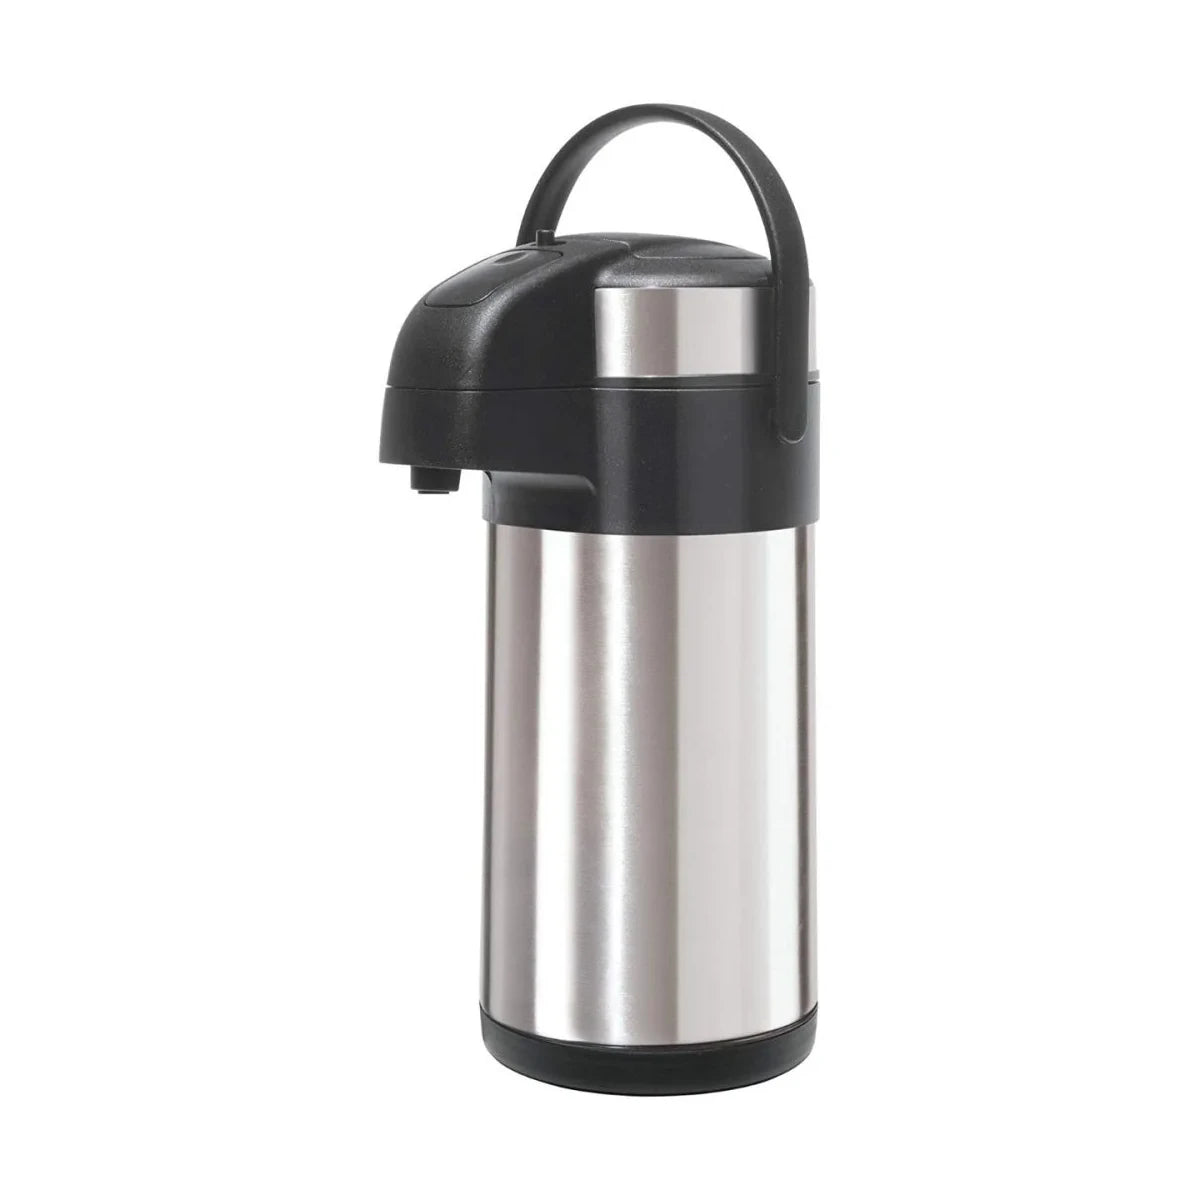 Thermal Carafe - Air KingTM Carafe Stainless Steel Liner 102 oz